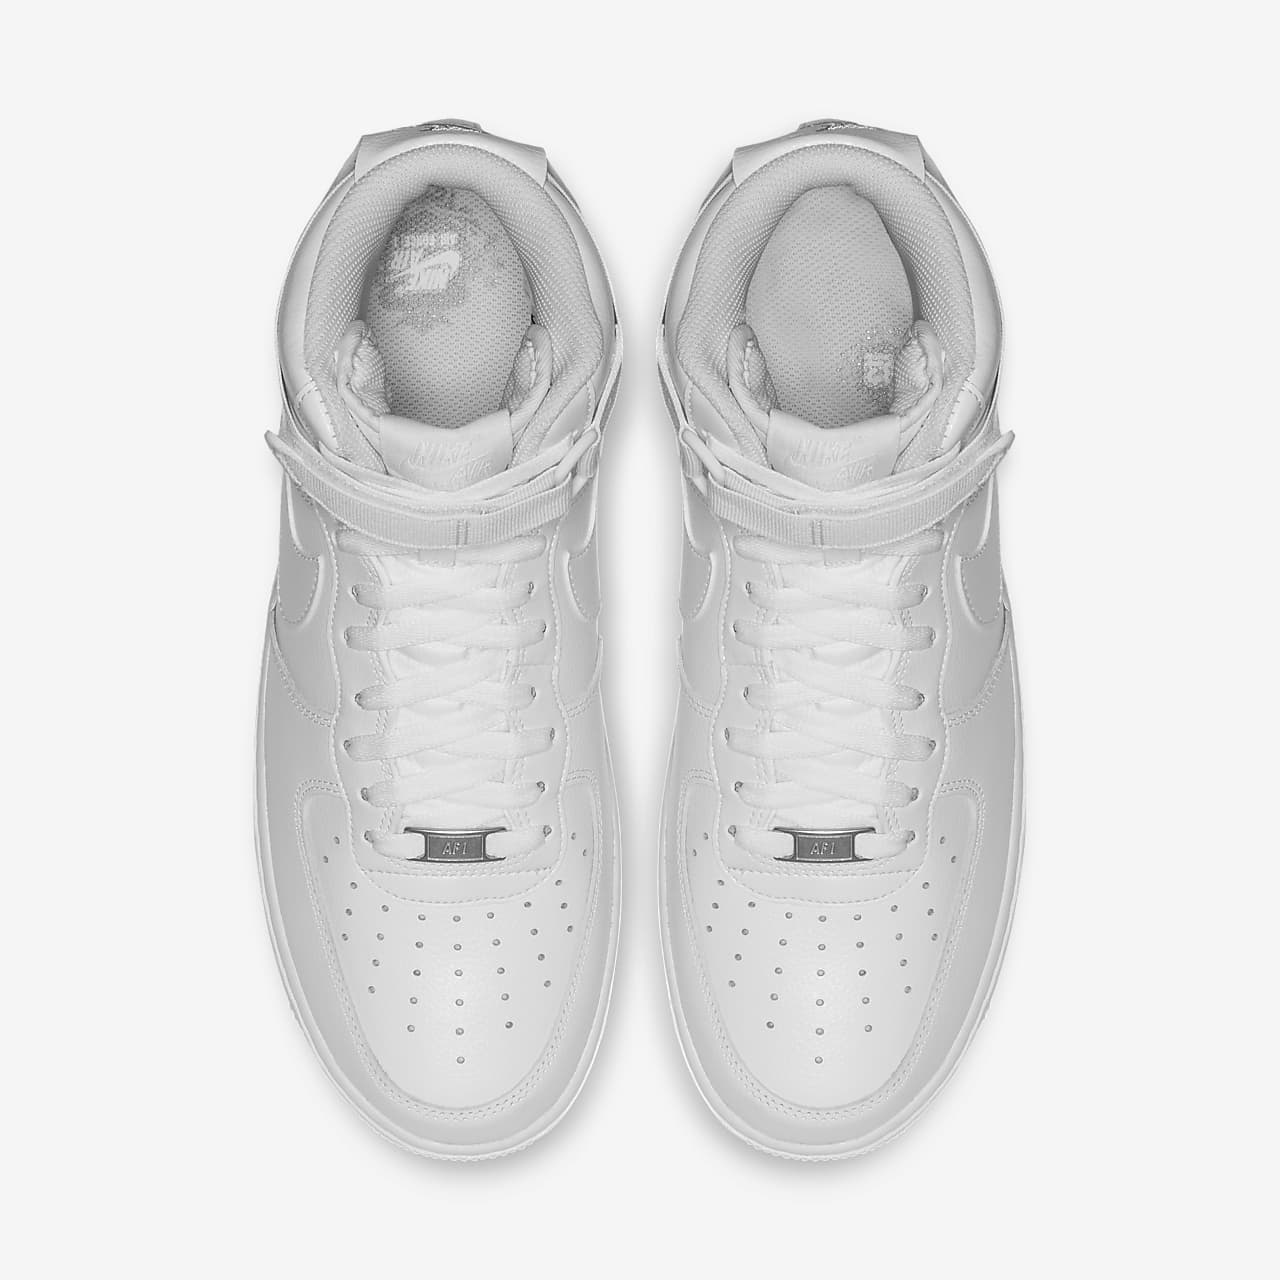 white nike air force 1 high-top sneakers